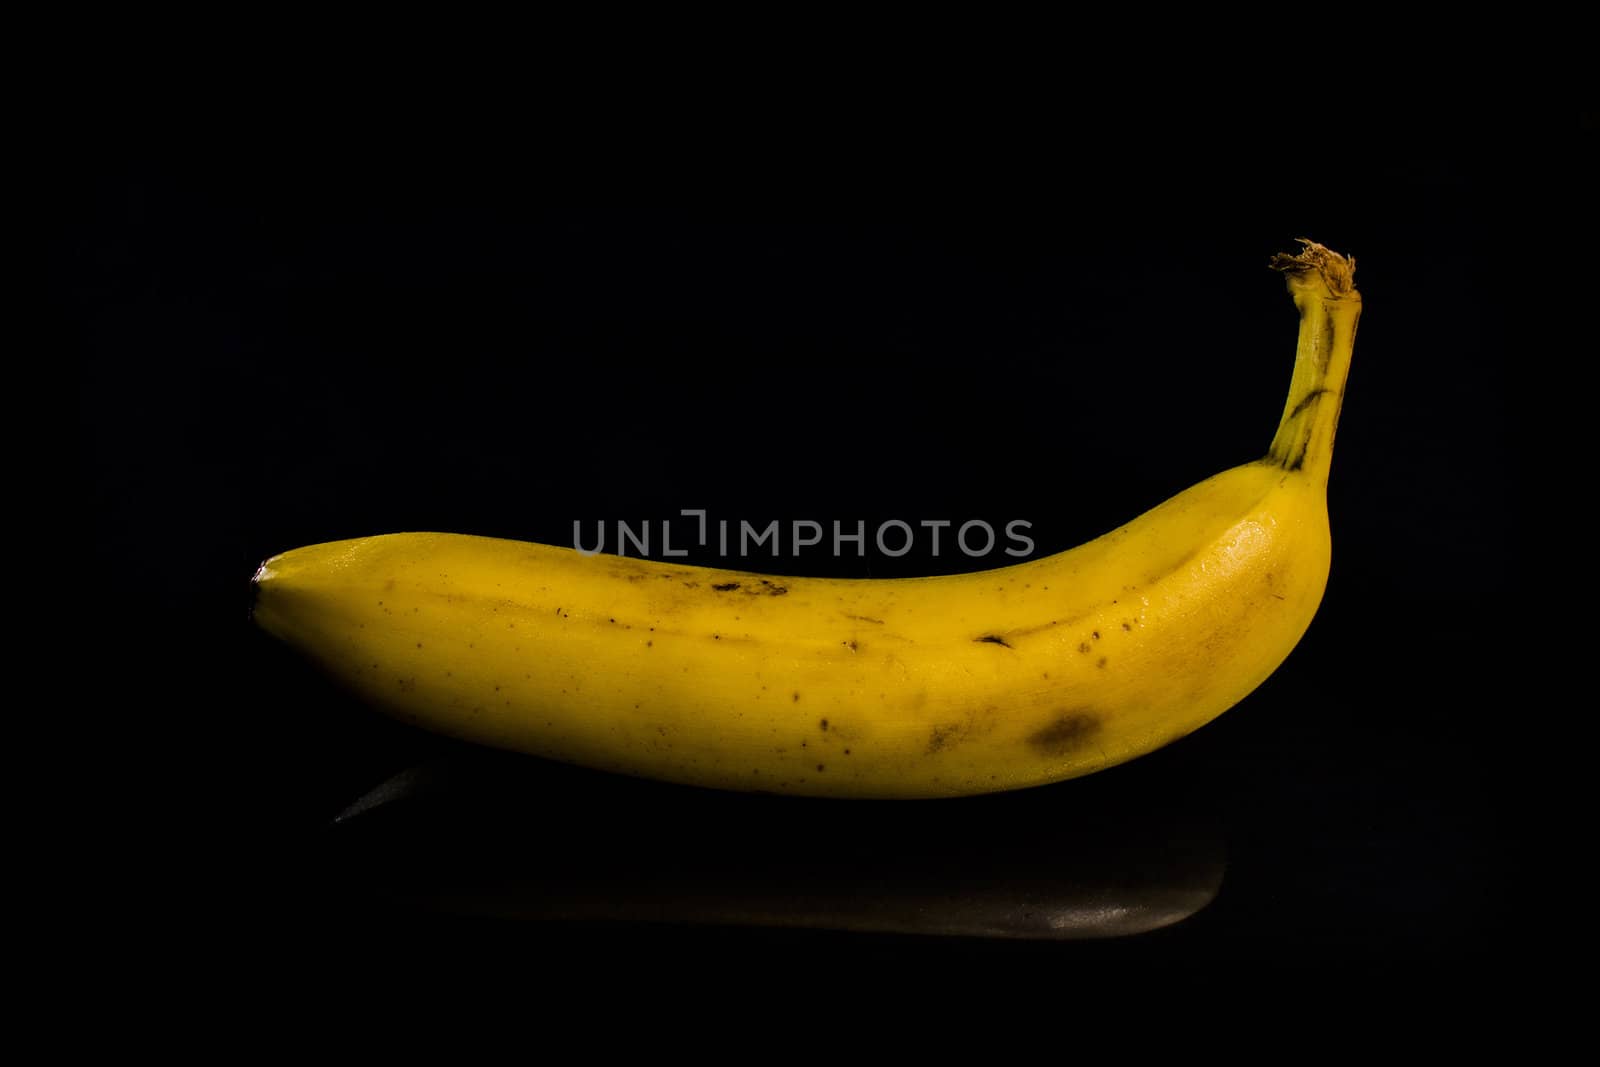 One fresh, yellow banana on black background with reflection